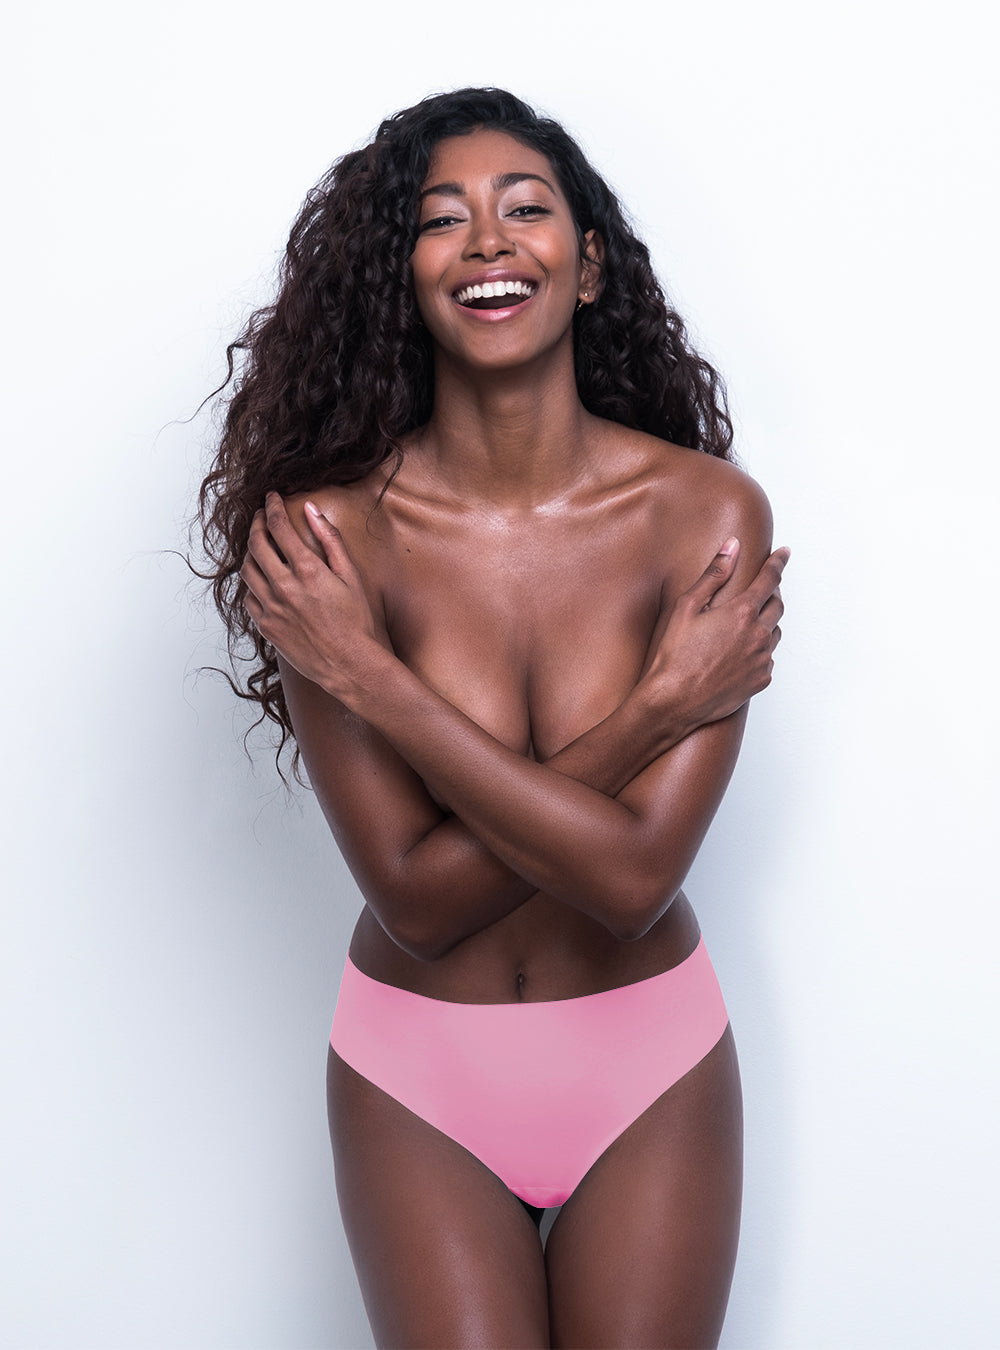 A smiling woman with curly hair covering her chest with her arms, wearing comfortable floral Body Hush 365 Bikini bottoms against a white background.